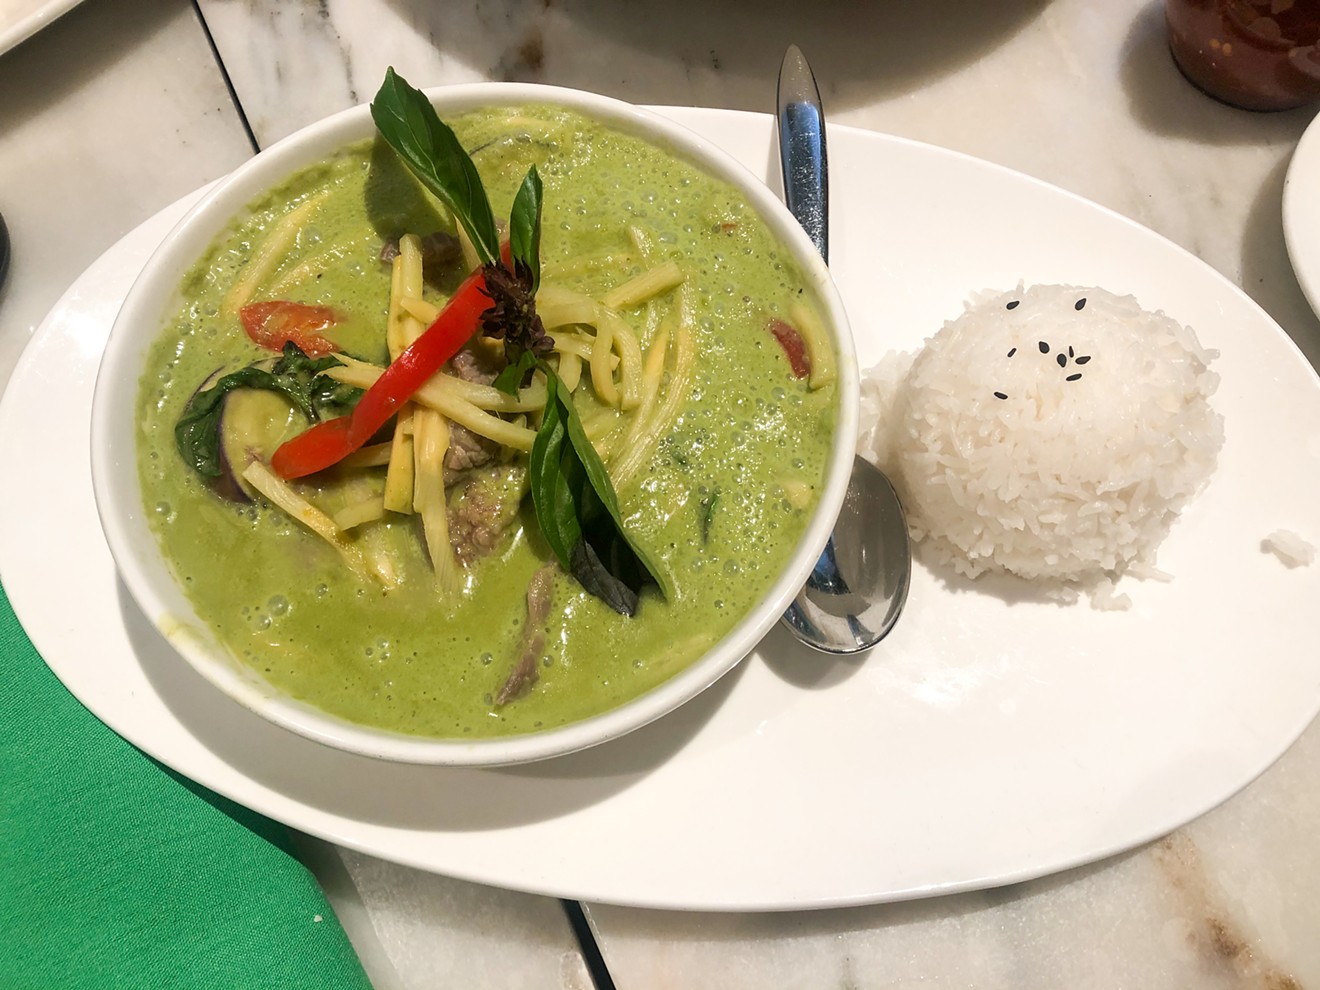 The green curry with beef at Asian Mint, served with jasmine rice